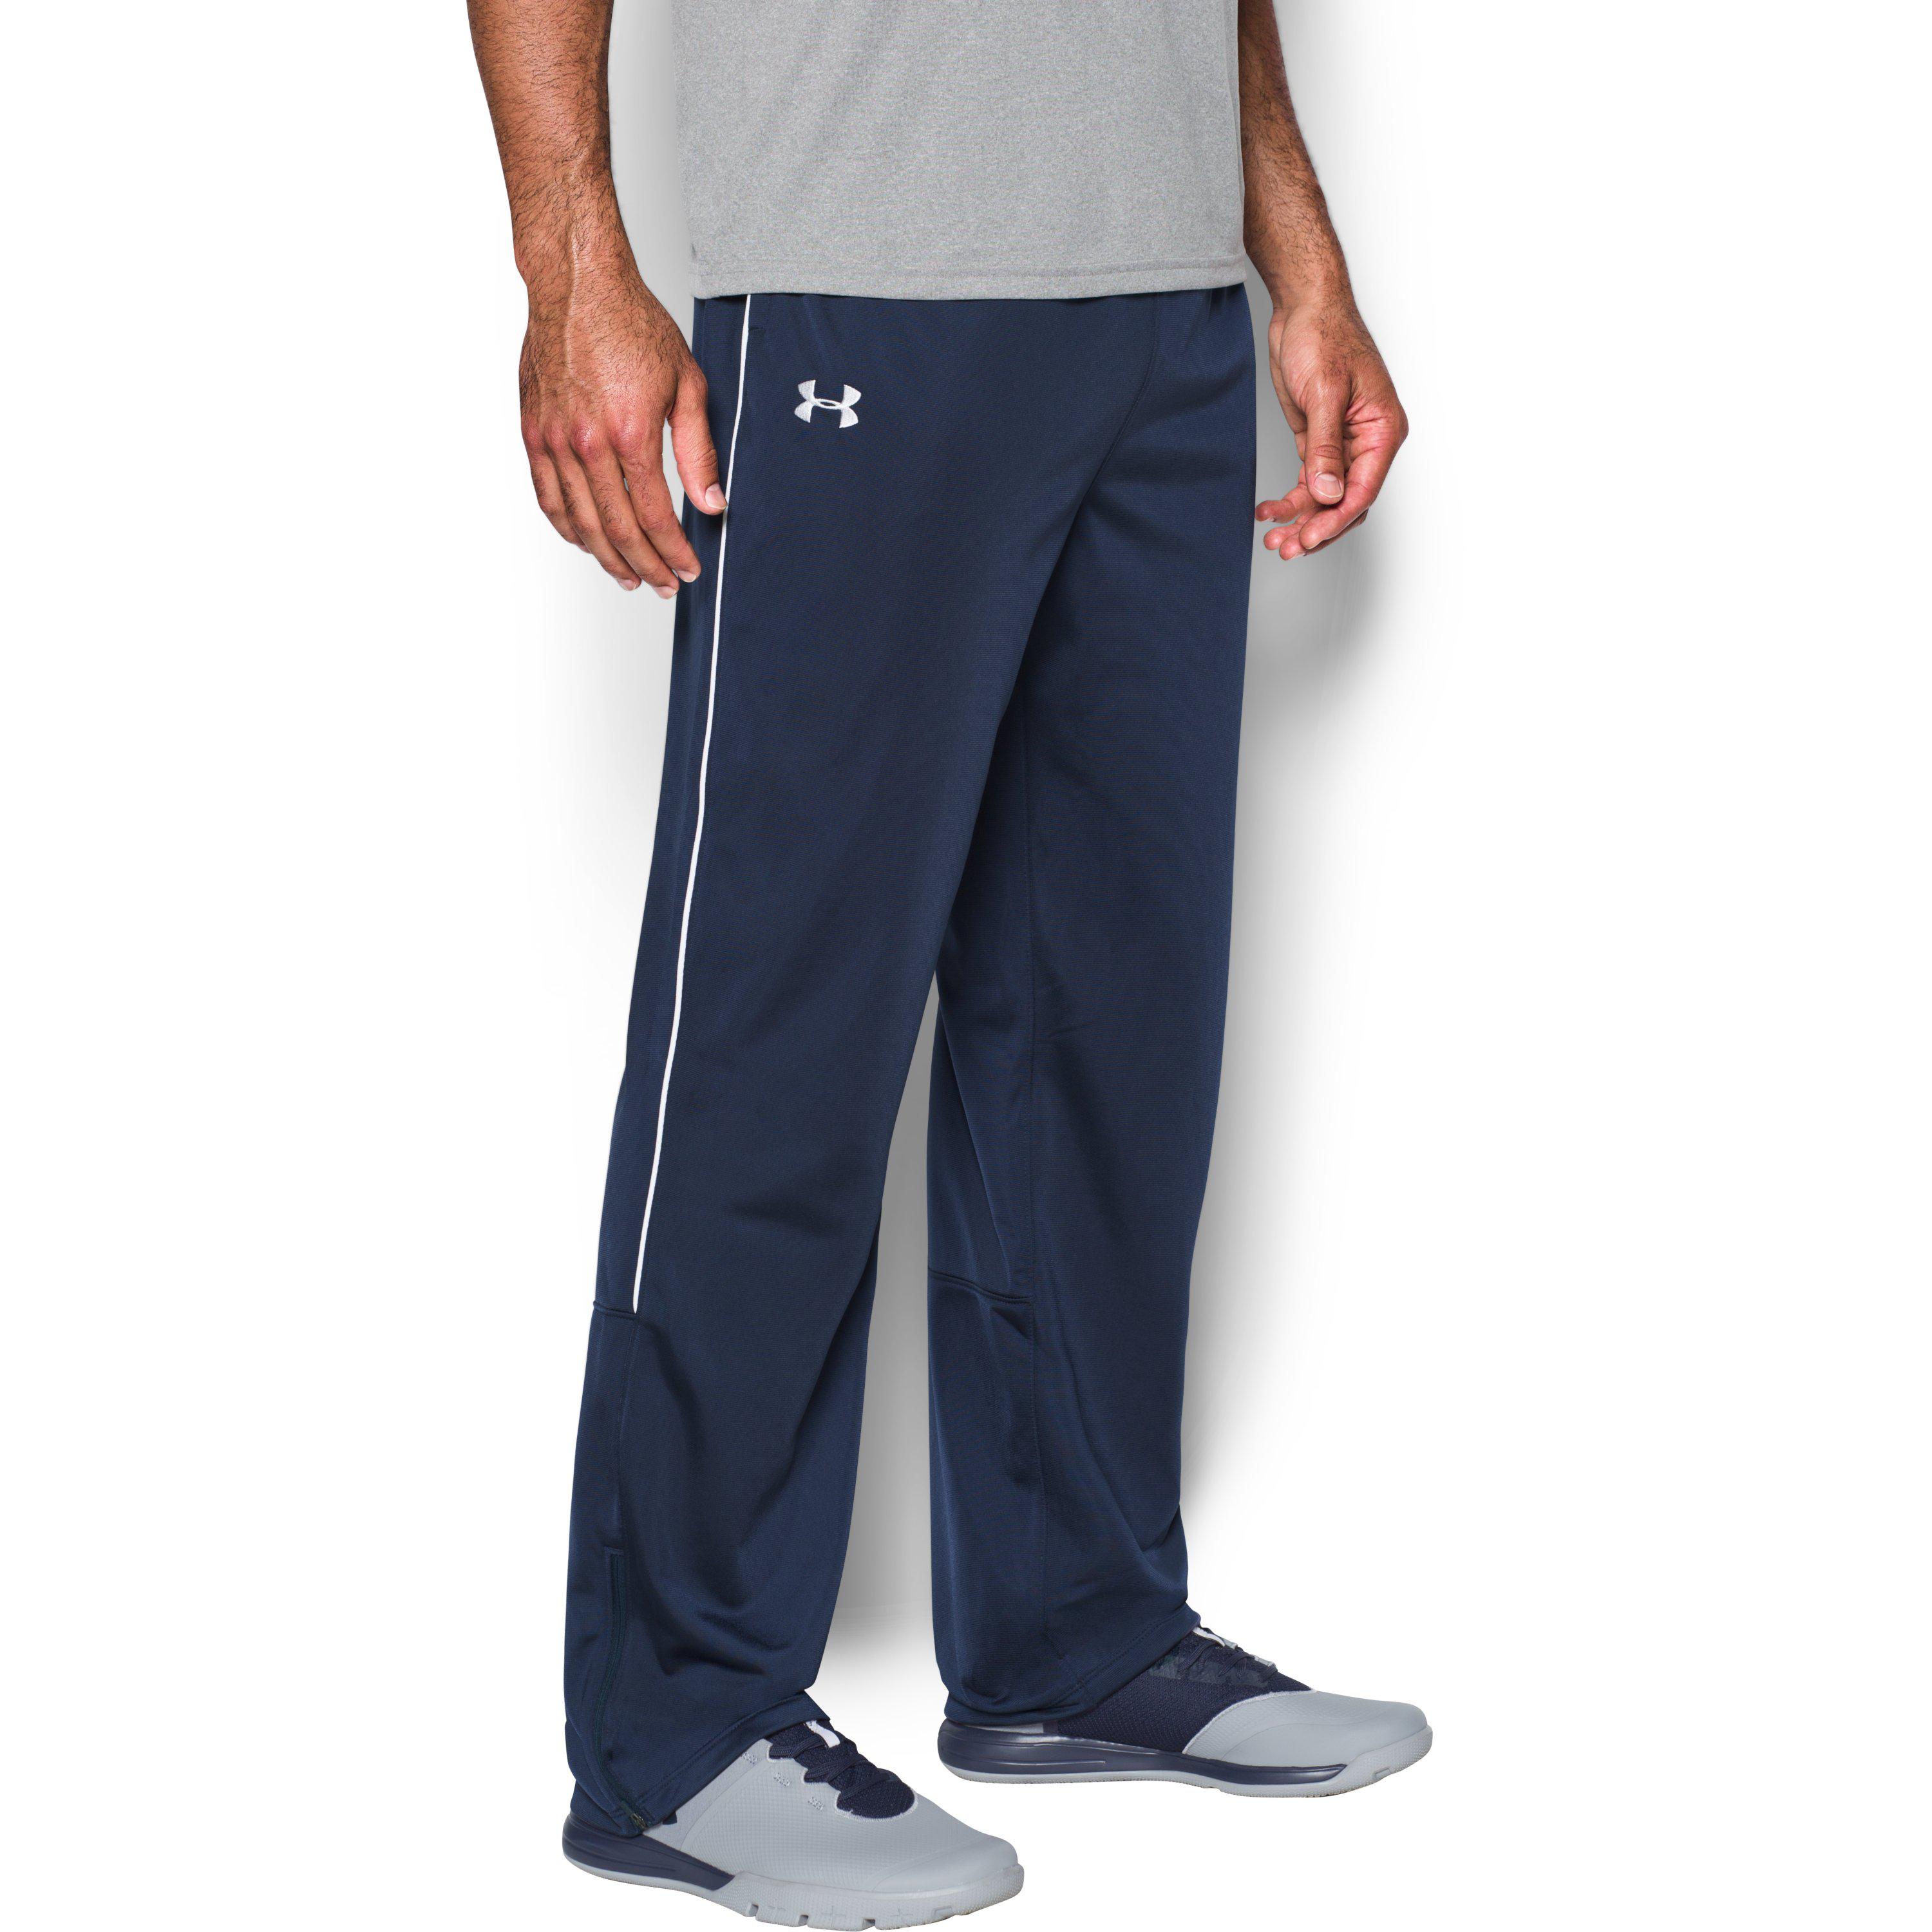 Lyst - Under Armour Men's Ua Rival Knit Warm-up Pants in Blue for Men